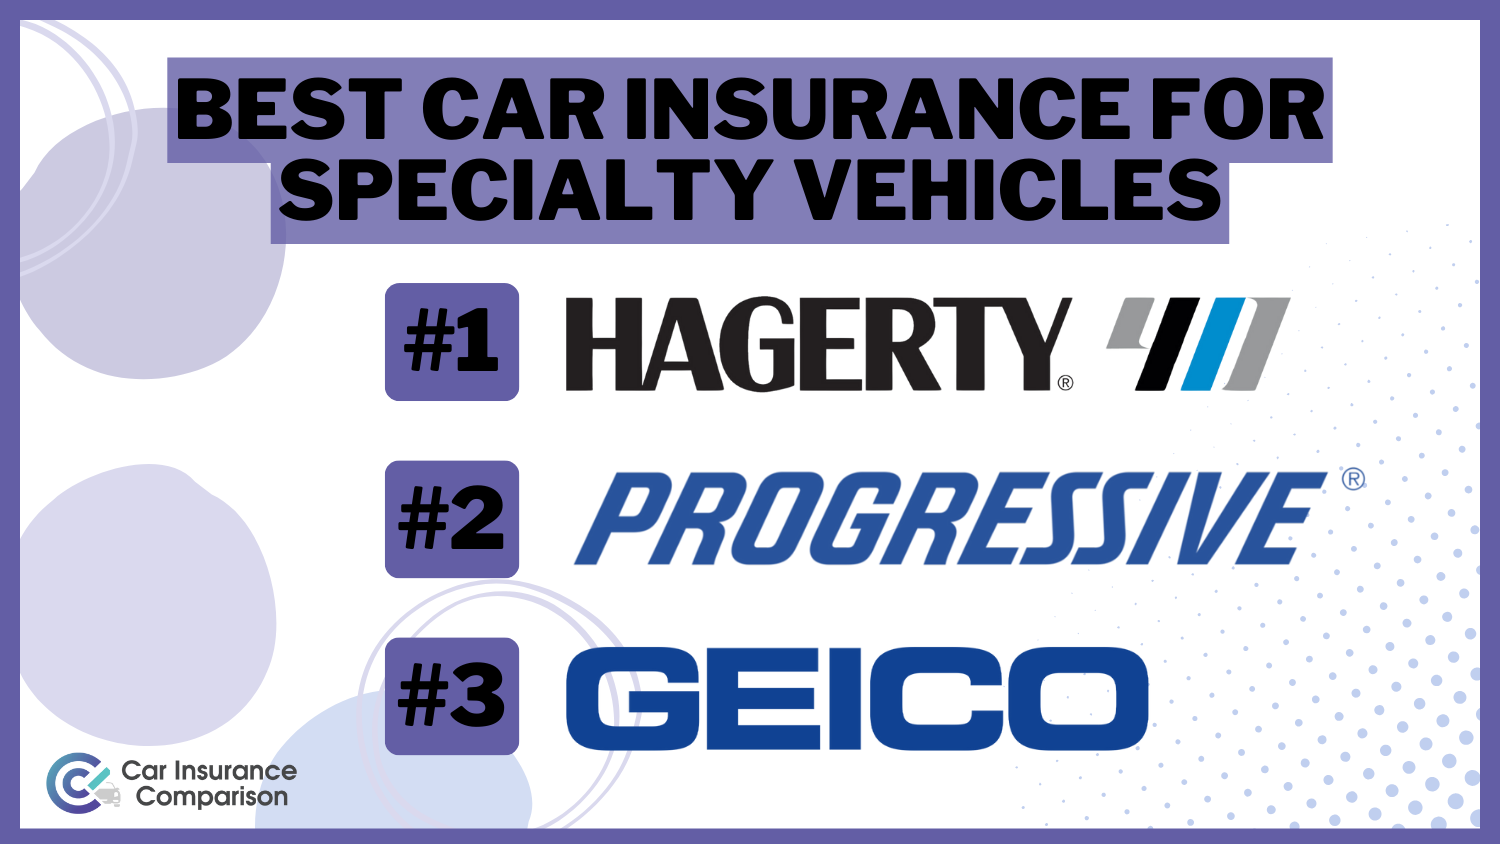 Best Car Insurance for Specialty Vehicles: Hagerty, Progressive, and Geico.